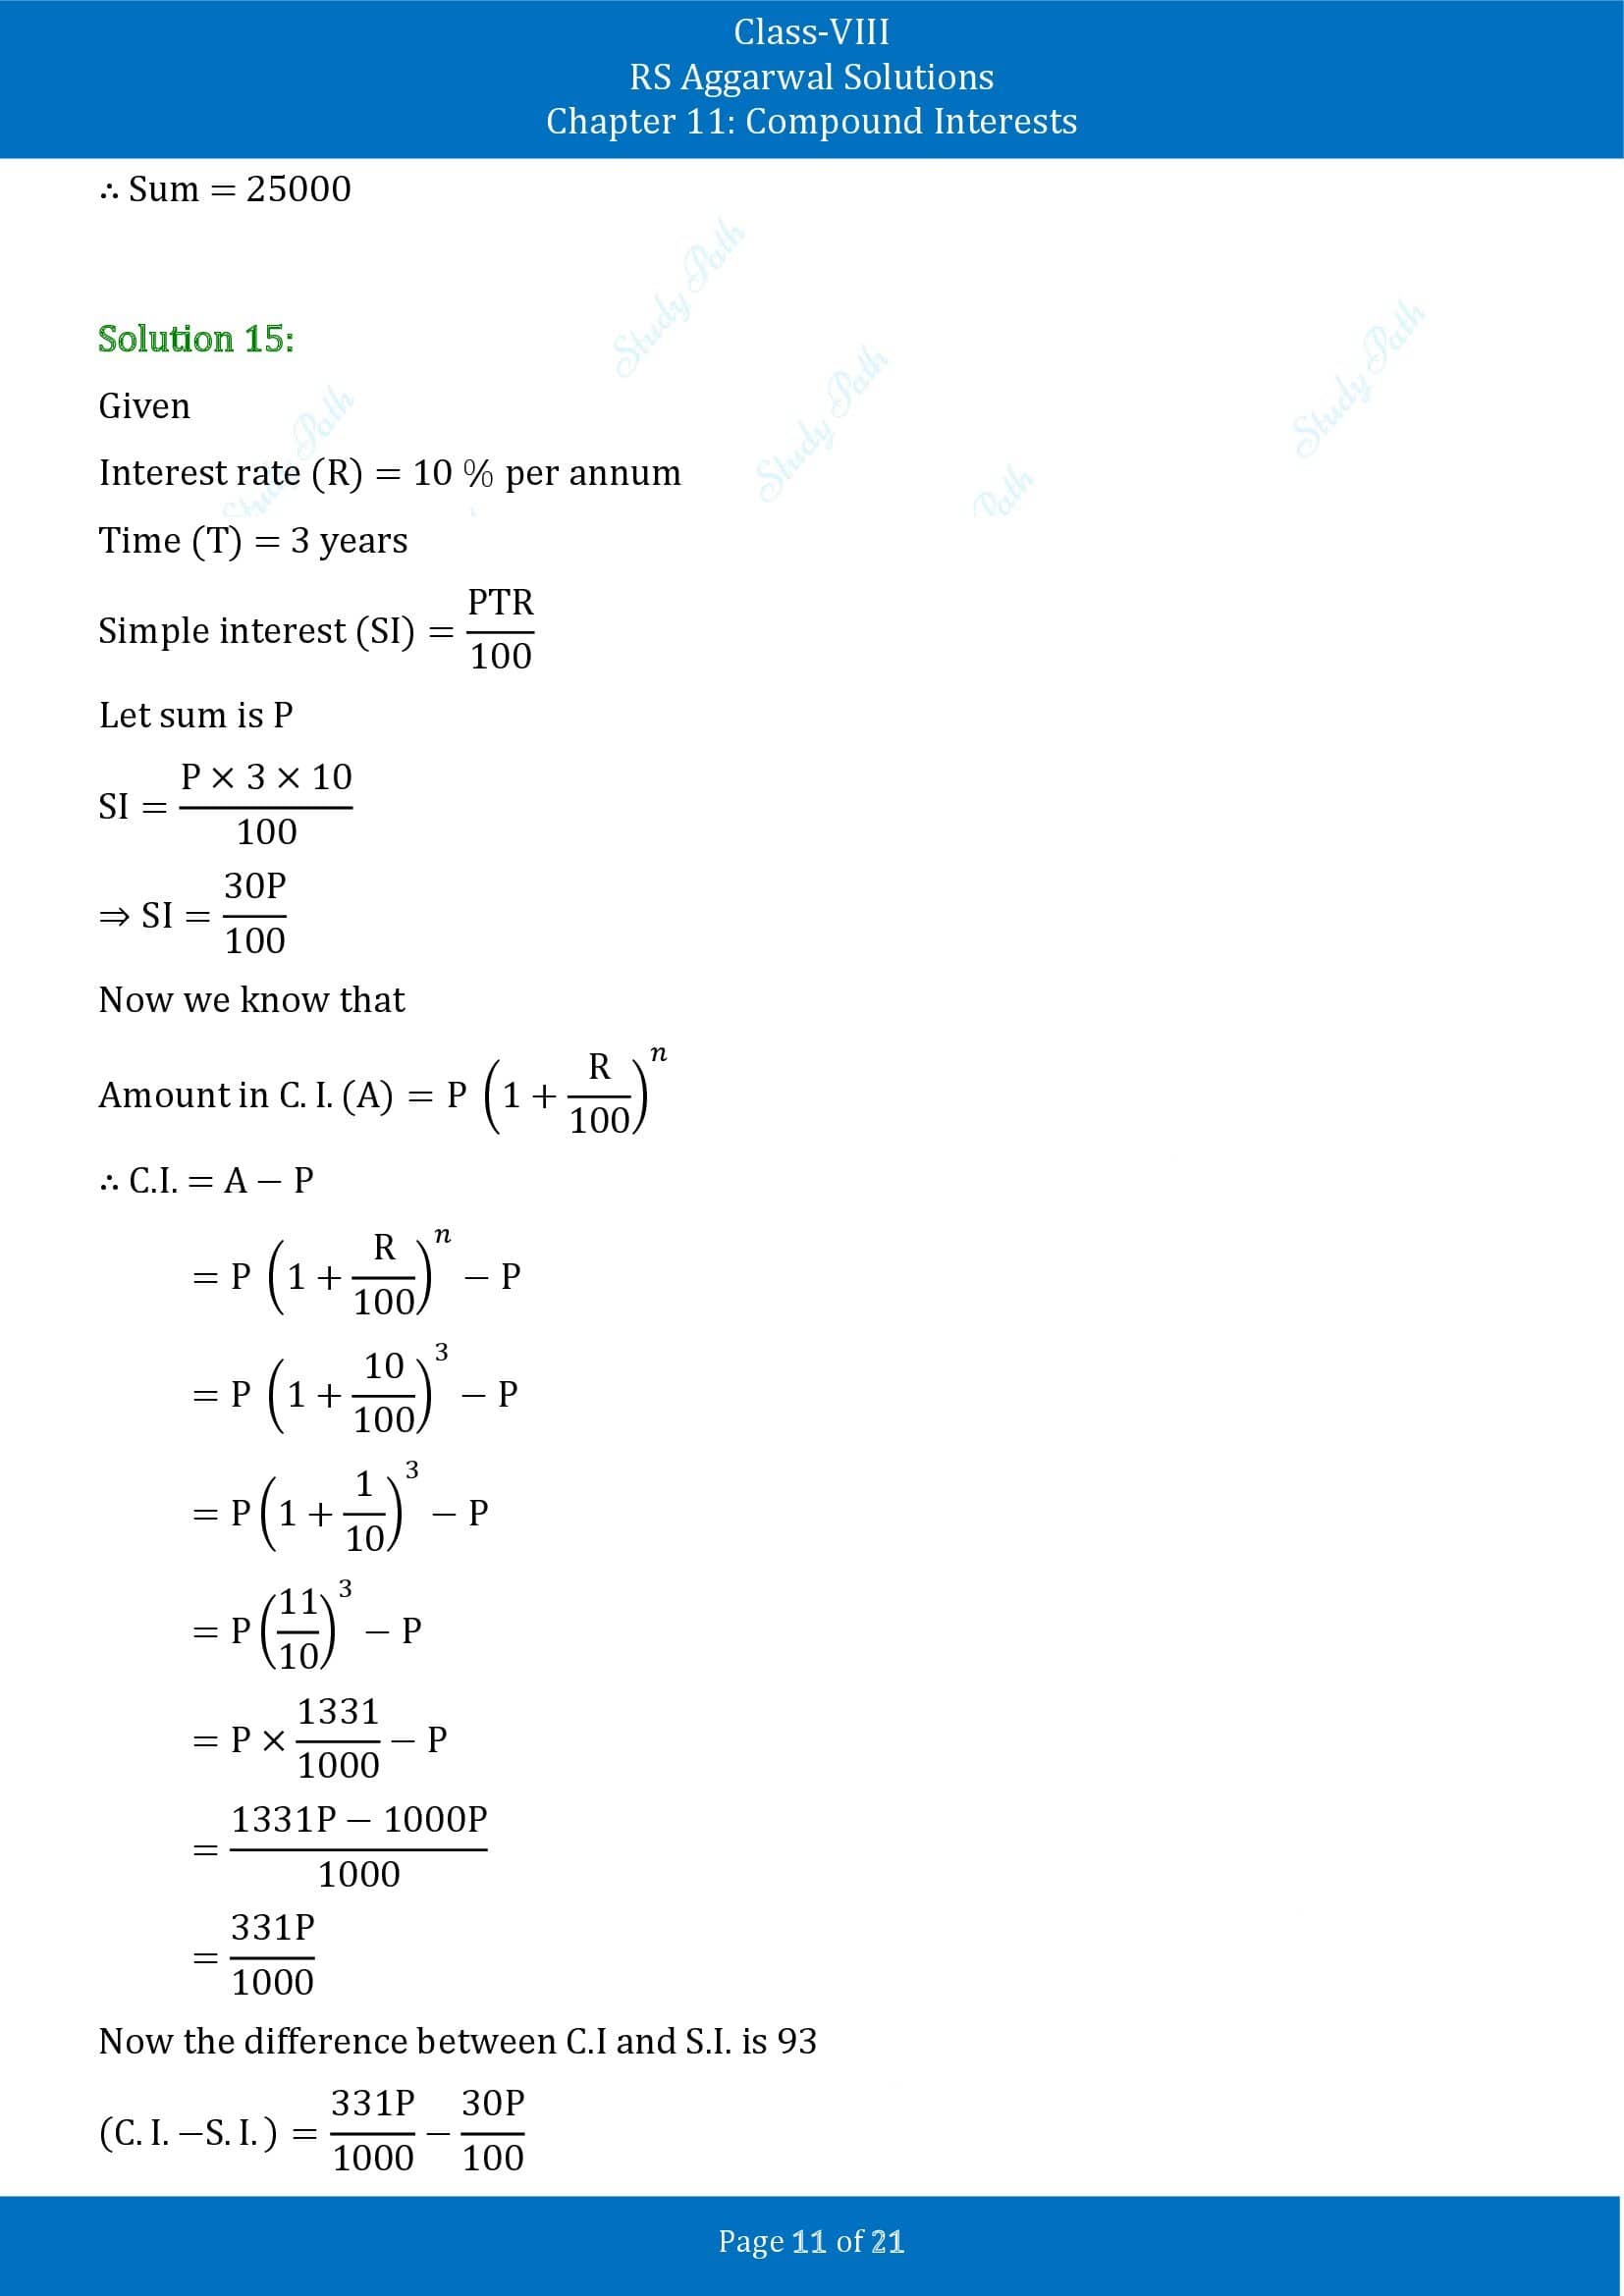 RS Aggarwal Solutions Class 8 Chapter 11 Compound Interests Exercise 11B 00011